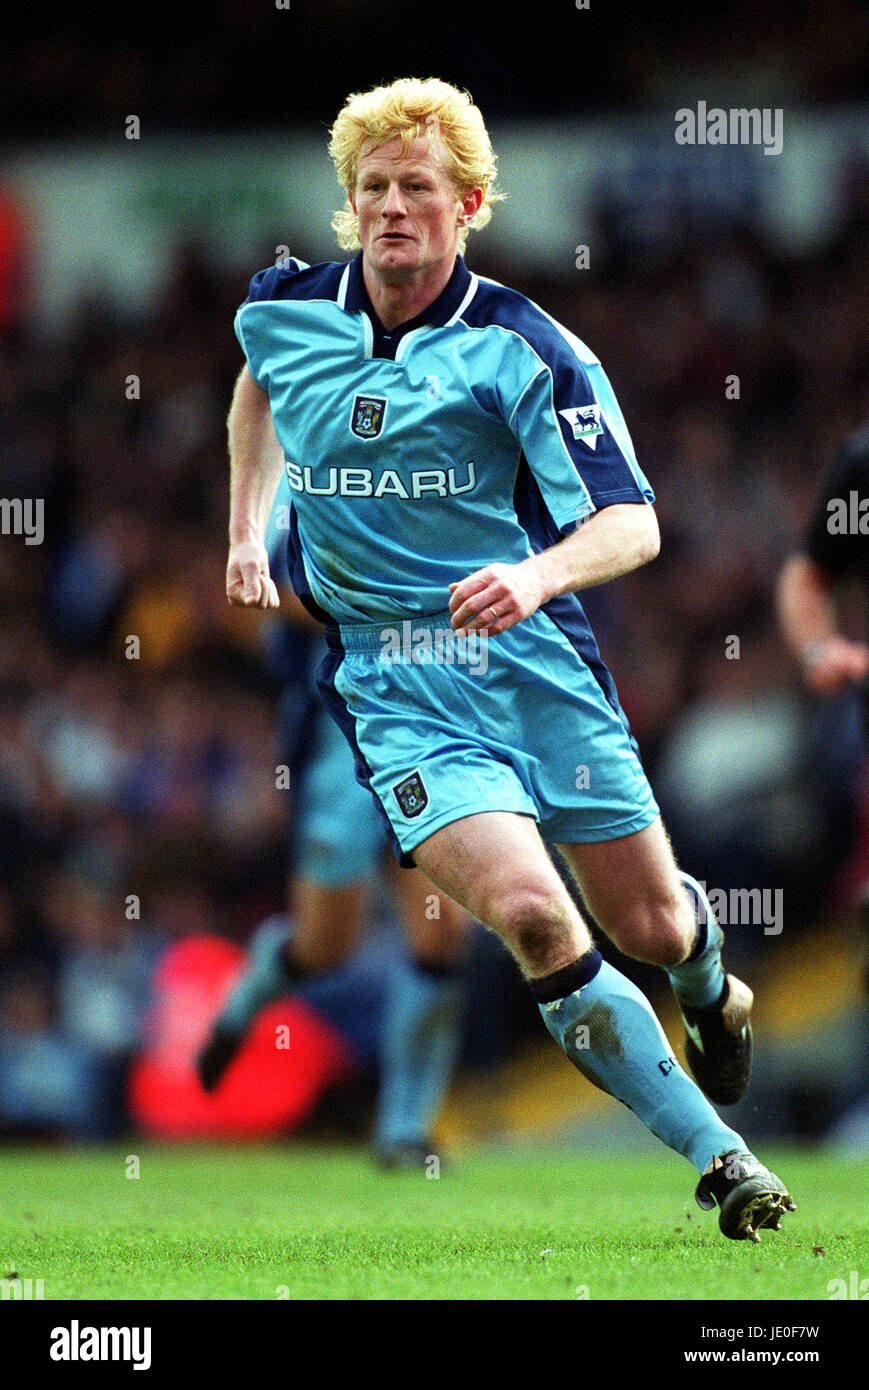 COLIN HENDRY COVENTRY CITY FC 04 mars 2000 Banque D'Images